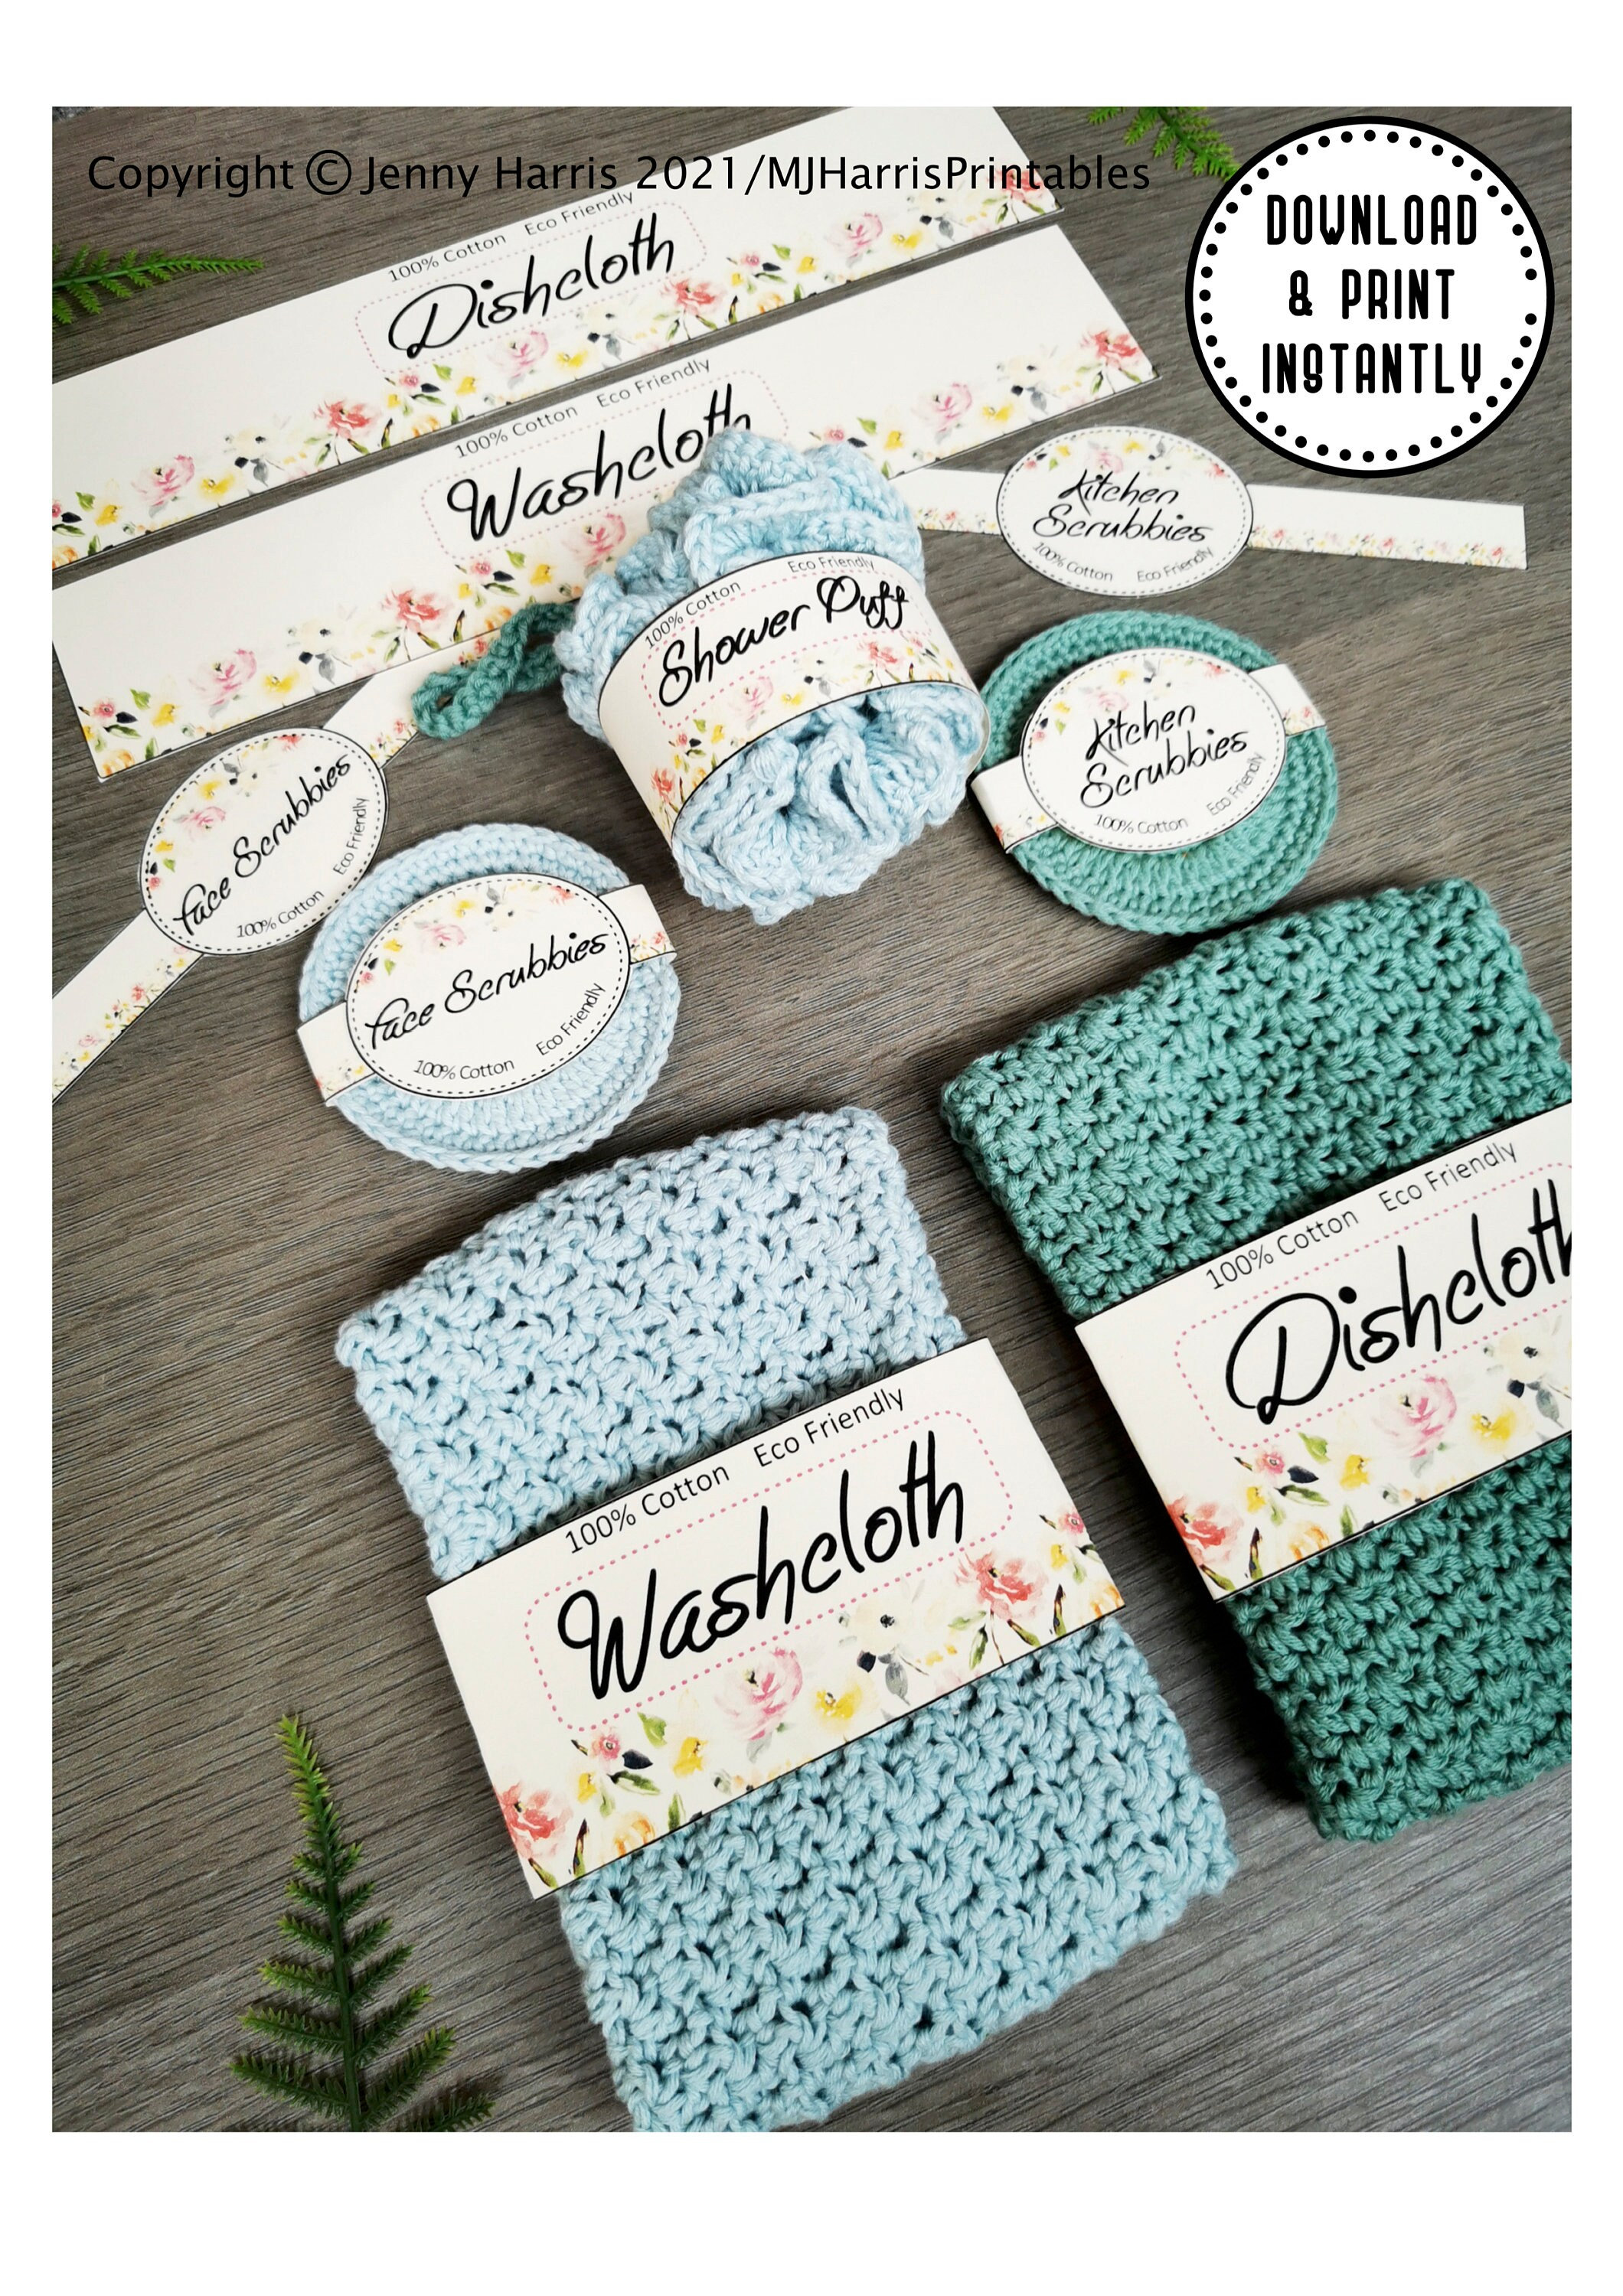 Crochet Tags Labels, Facial Rounds, Washcloth Wrap, Printable Gift